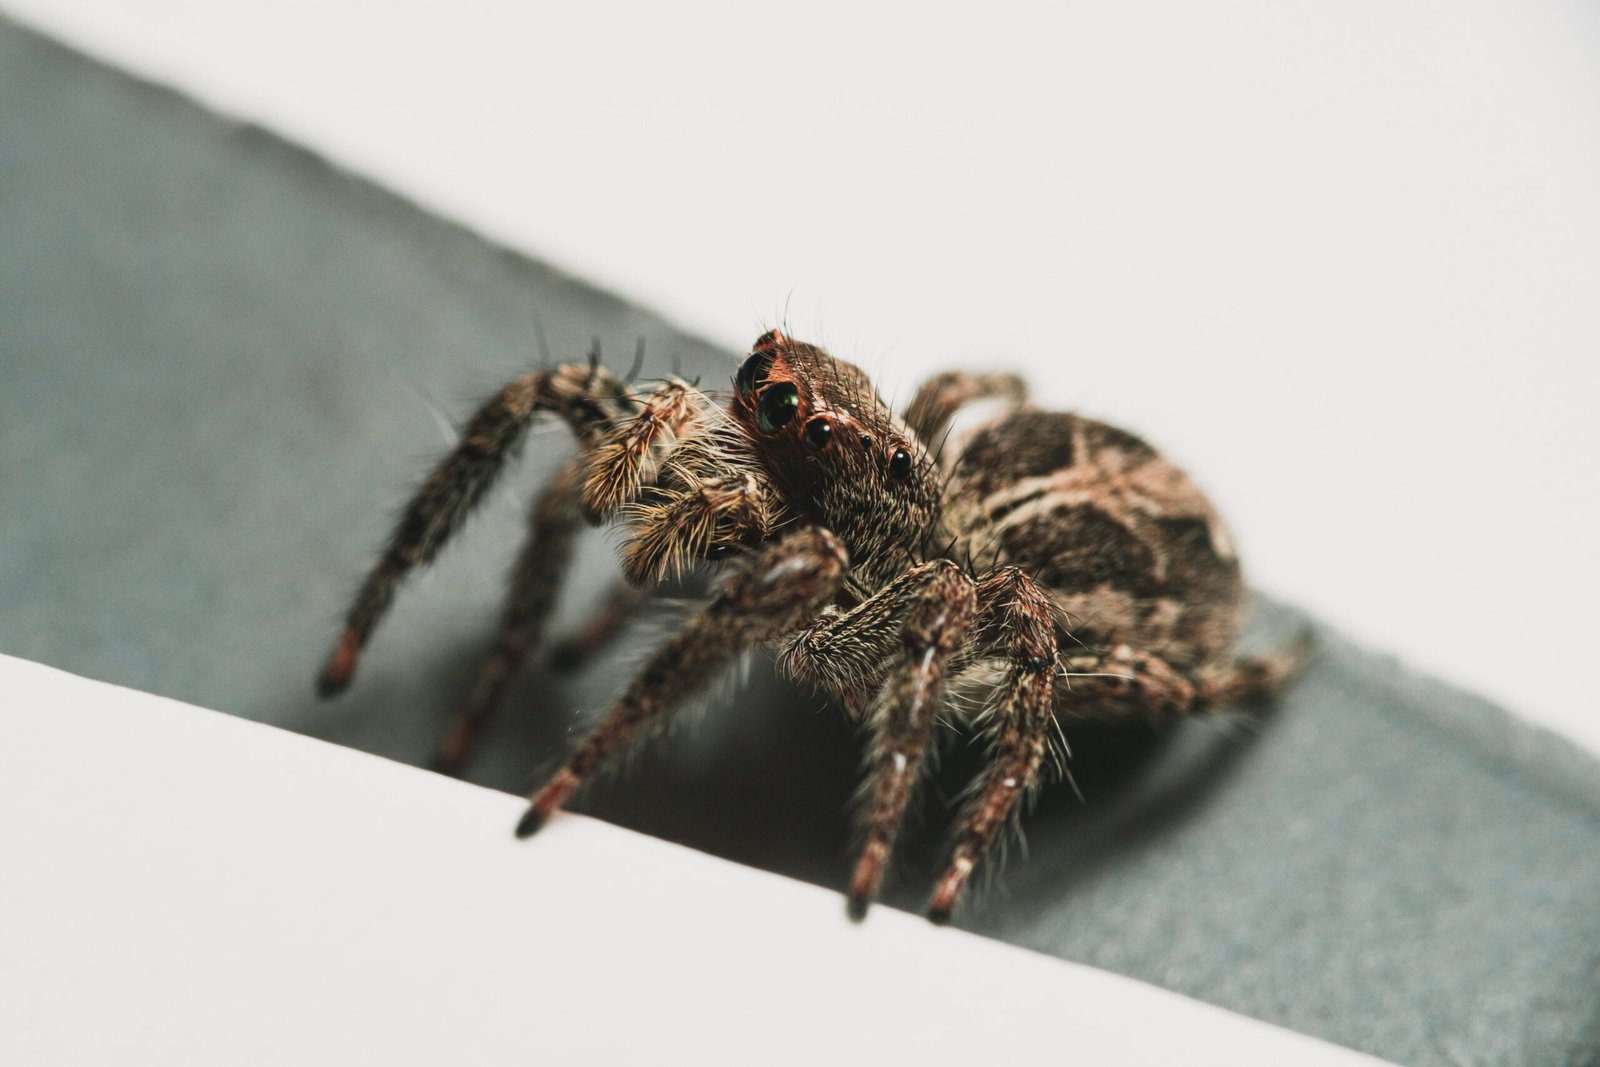 What Are The Fascinating Characteristics Of The Indian Violet Tarantula, And How Is It Best Cared For As A Pet?